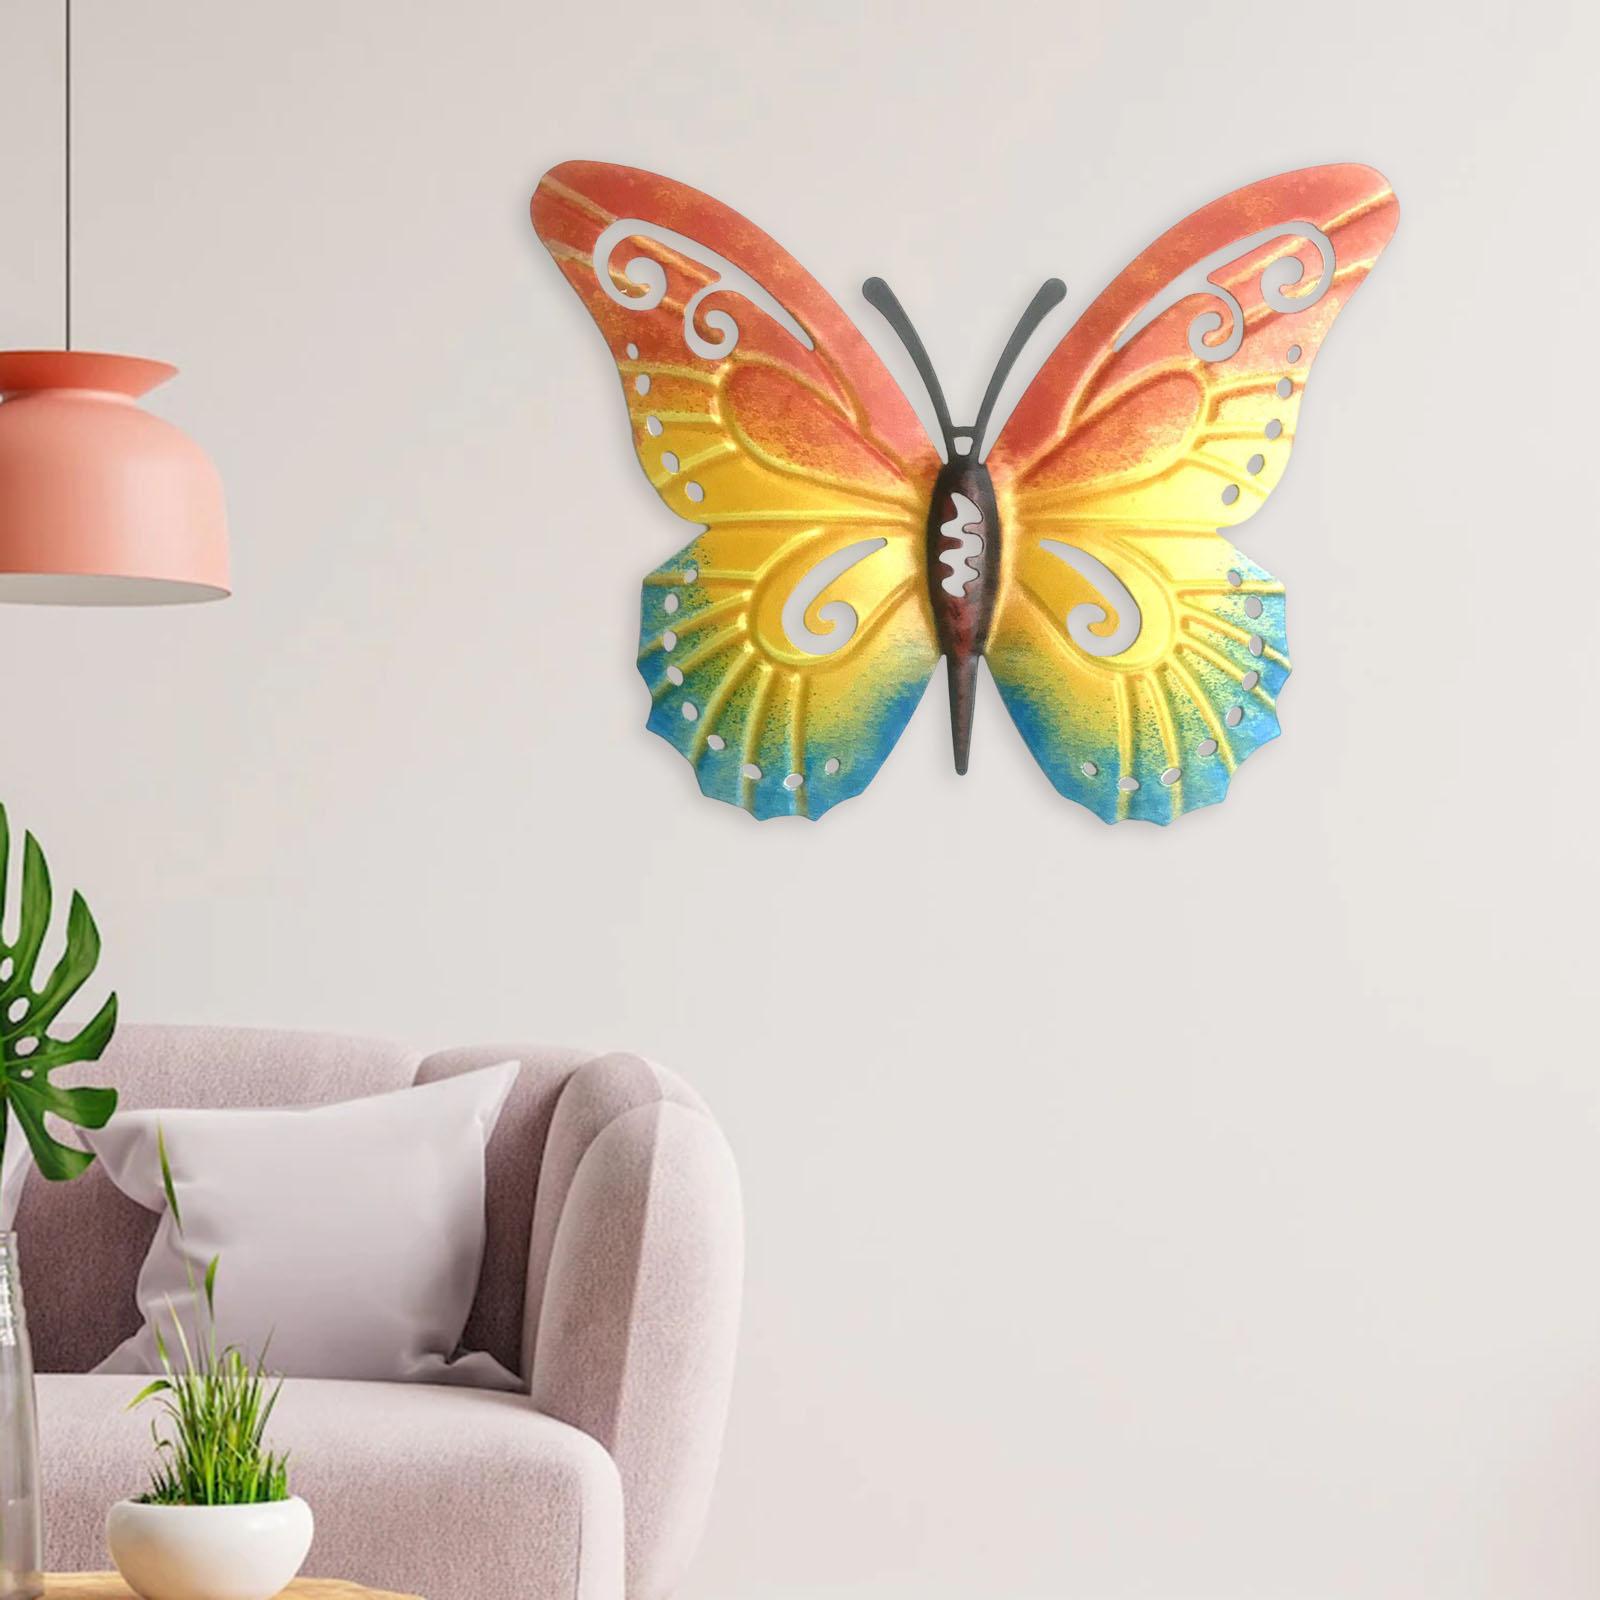 Butterfly Wall Decors Wall Sculptures Figurines for Garden Home Decors orange yellow blue